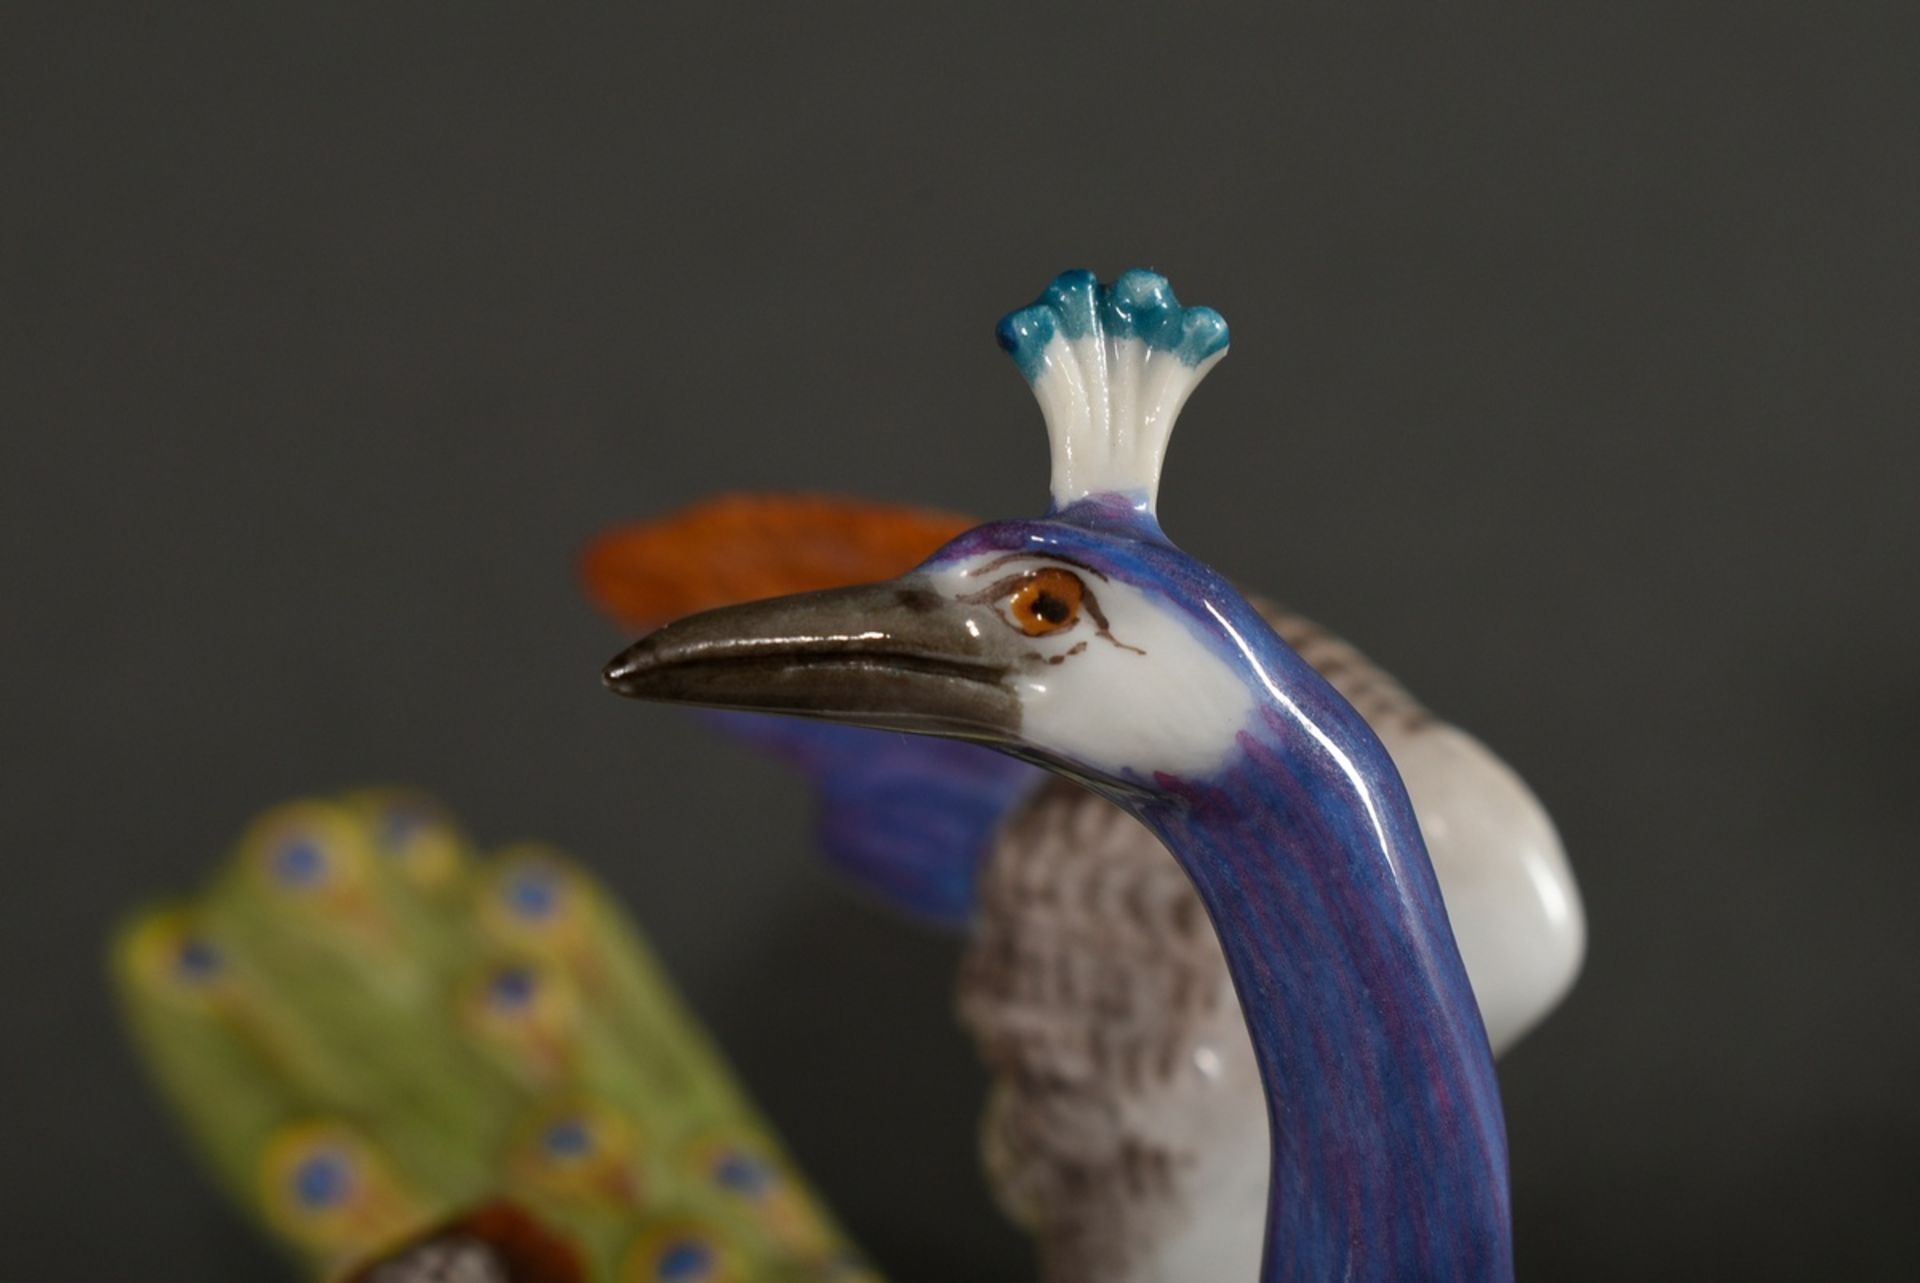 Small Meissen figure "Peacock", polychrome painted, model no.: 7719, form no.: 95, year: 1978, 9x11 - Image 6 of 8